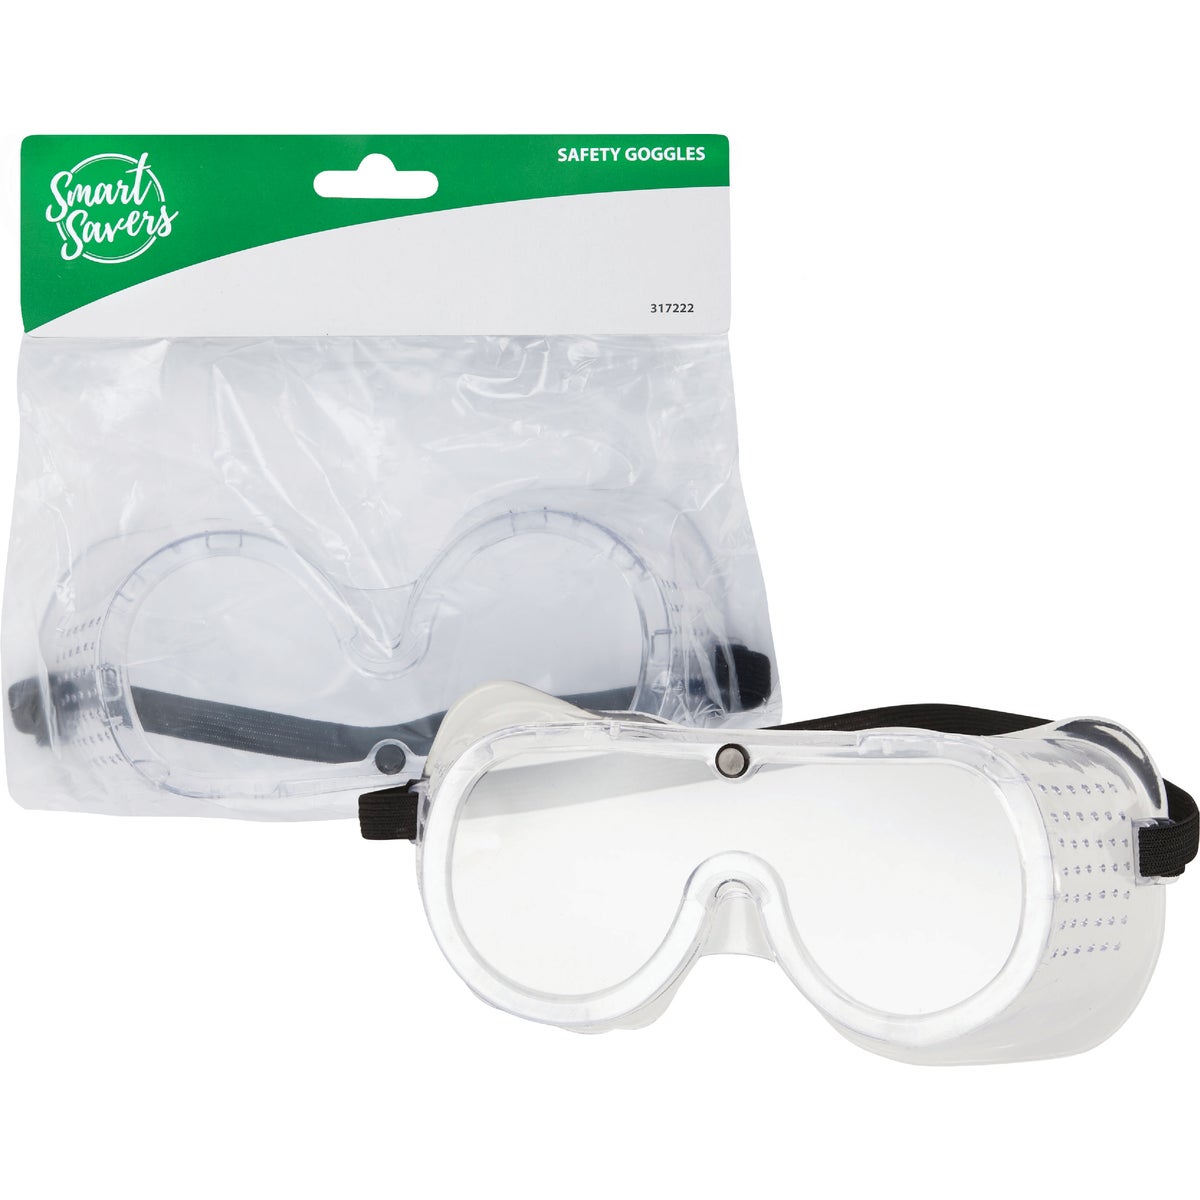 Item 317222, Safety goggles featuring a clear frame and clear lens.